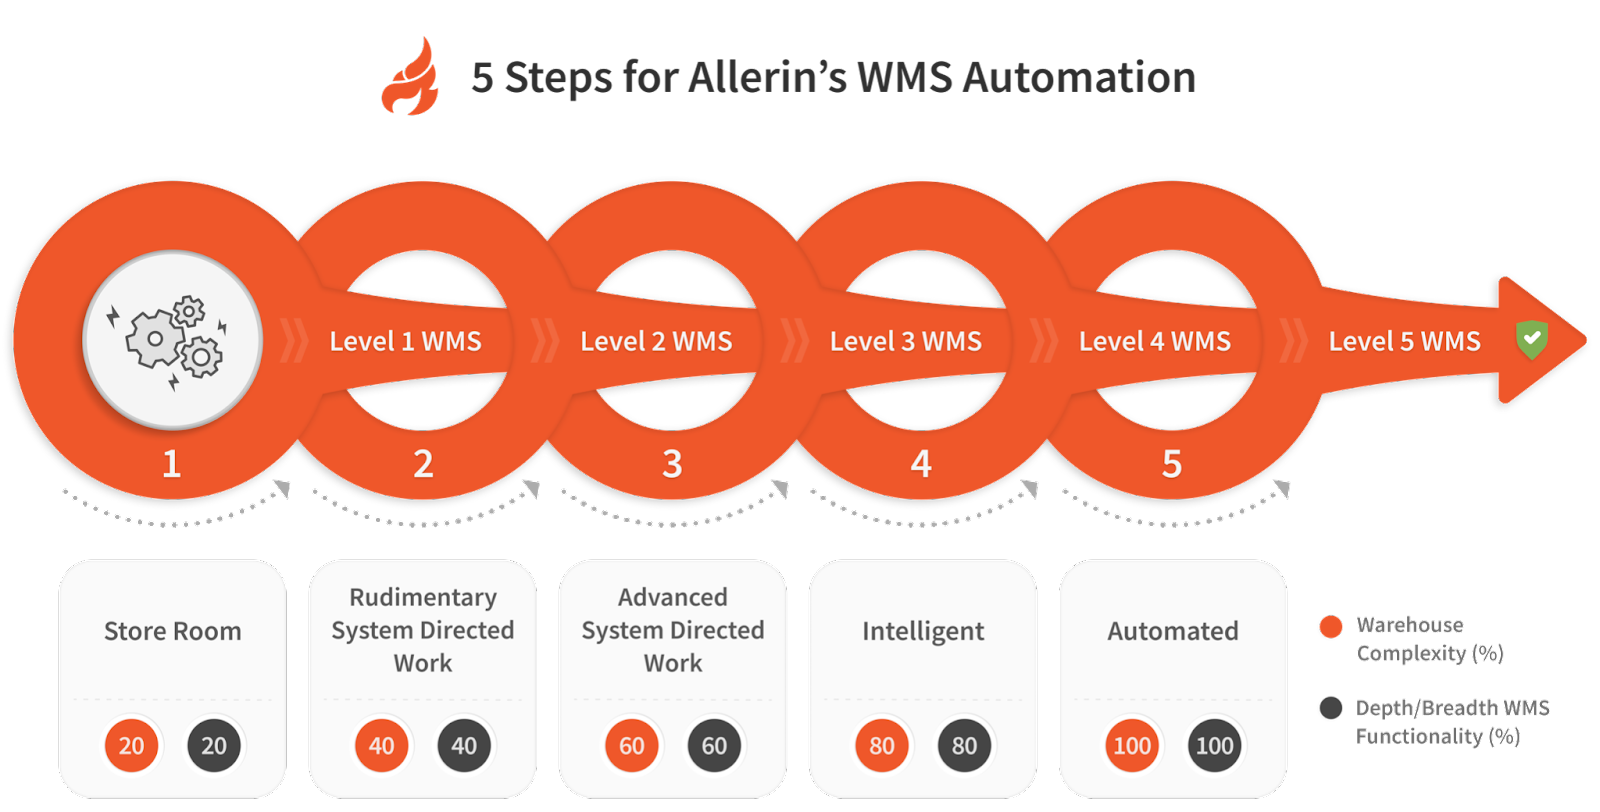 5 Steps for Allerin's WMS Automation